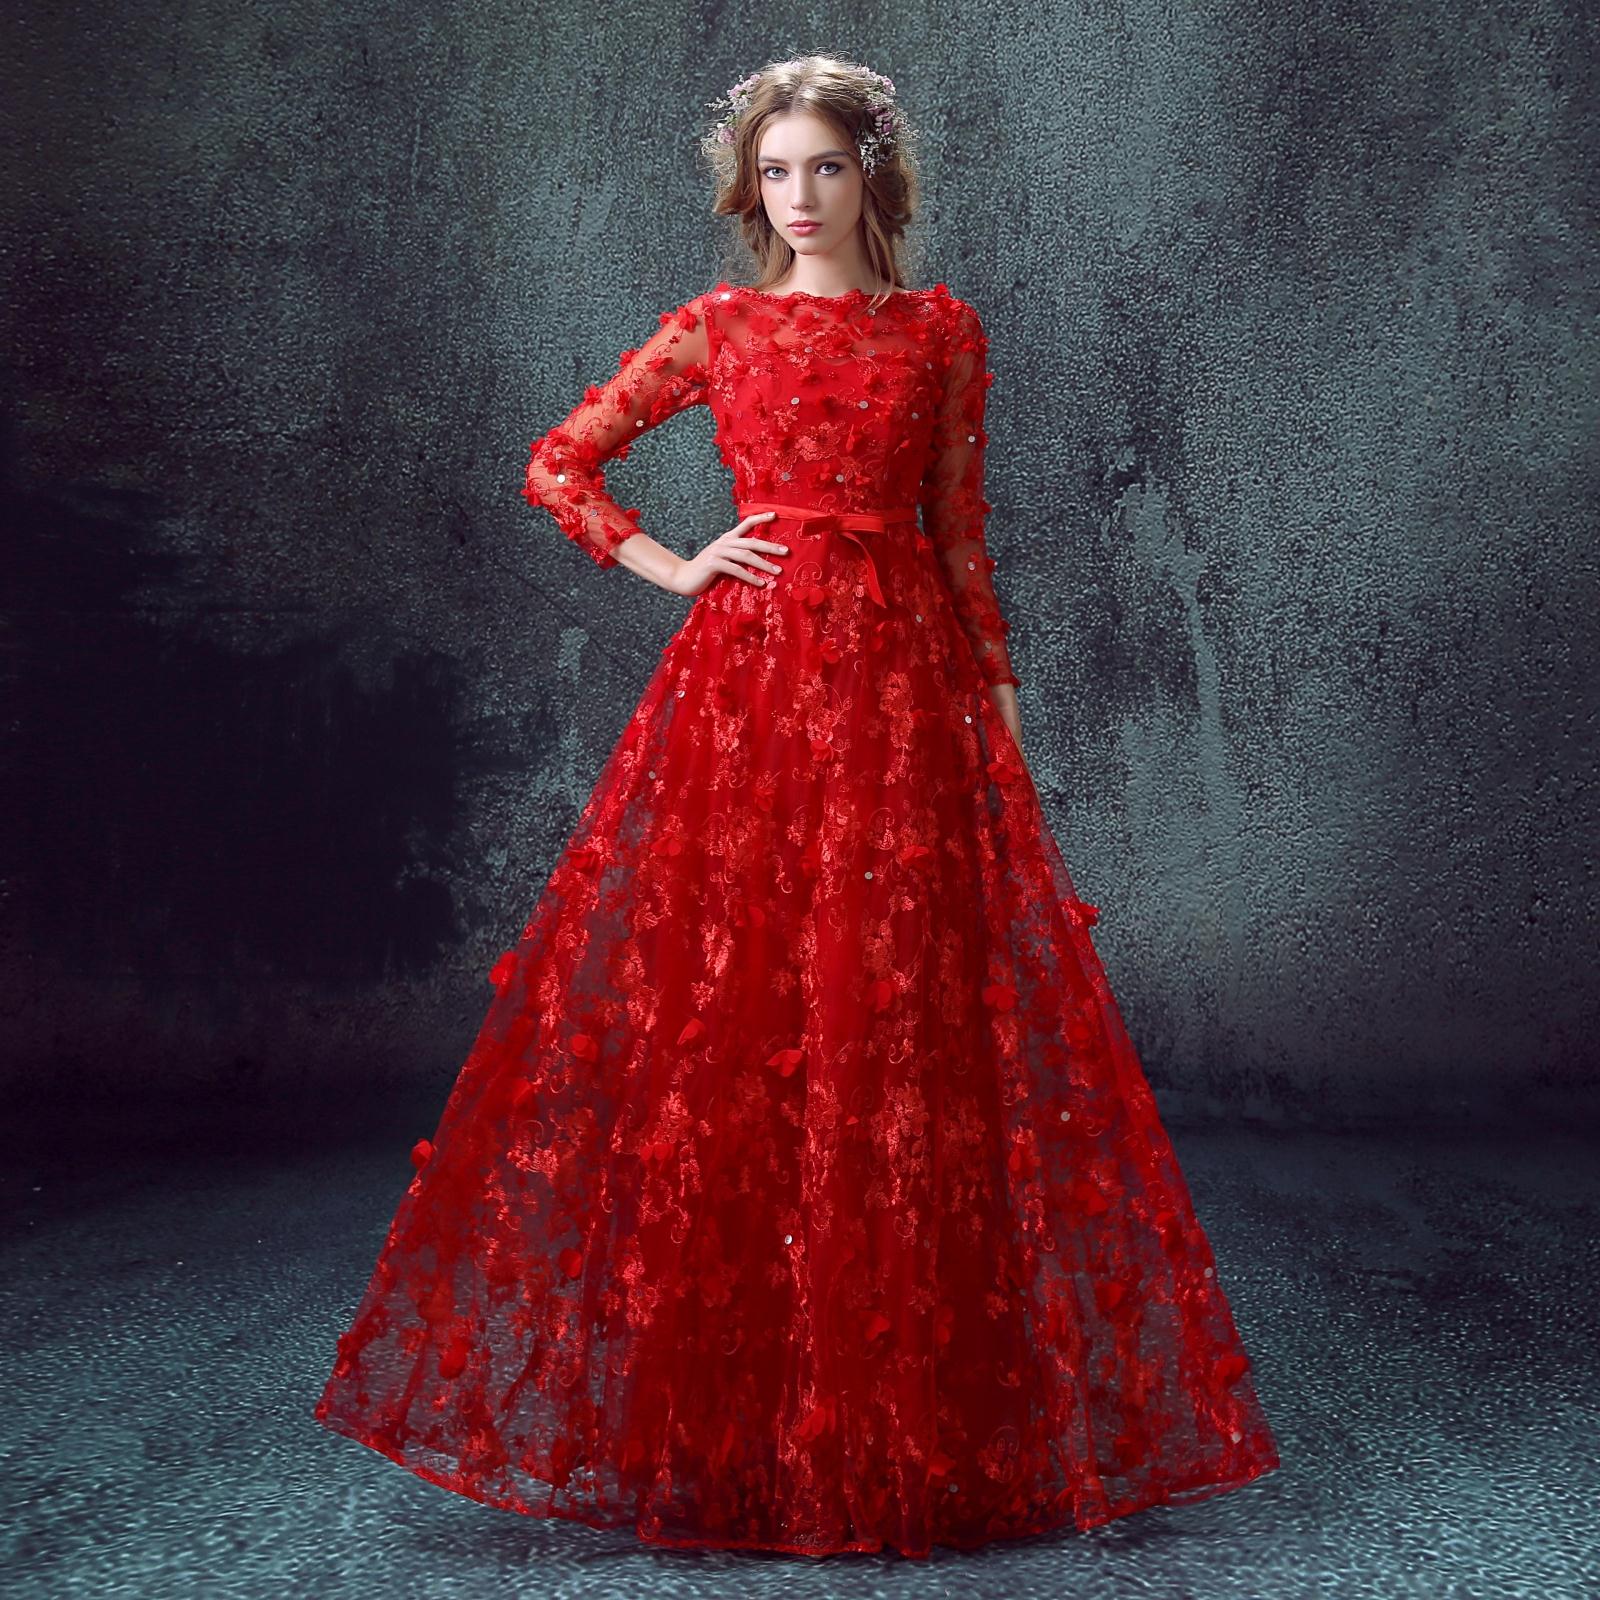 Buy THE LONDON STORE Women's Festival Red Evening Dress V-Neck Full Sleeve  Butterfly Appliques High-end Lace Ball Gown at Amazon.in